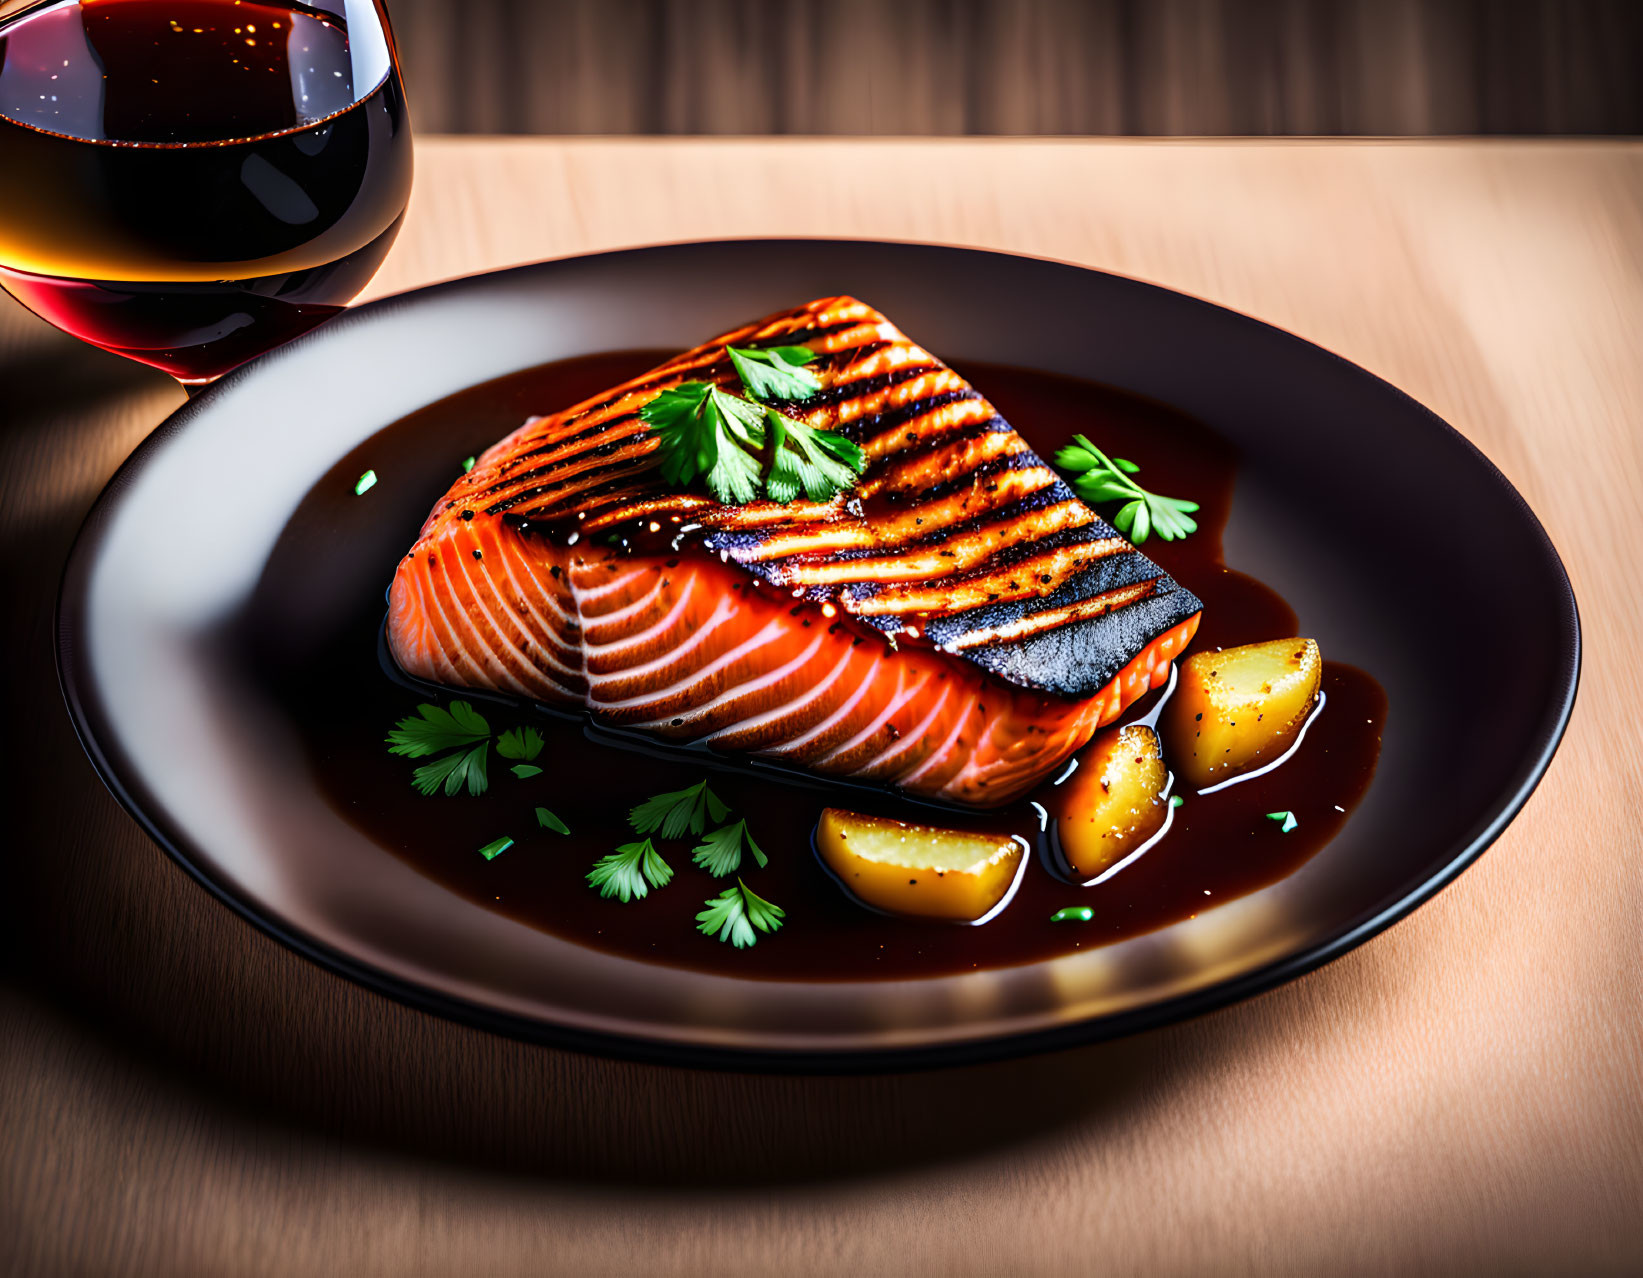 Grilled Salmon Fillet with Lemon Slices and Red Wine